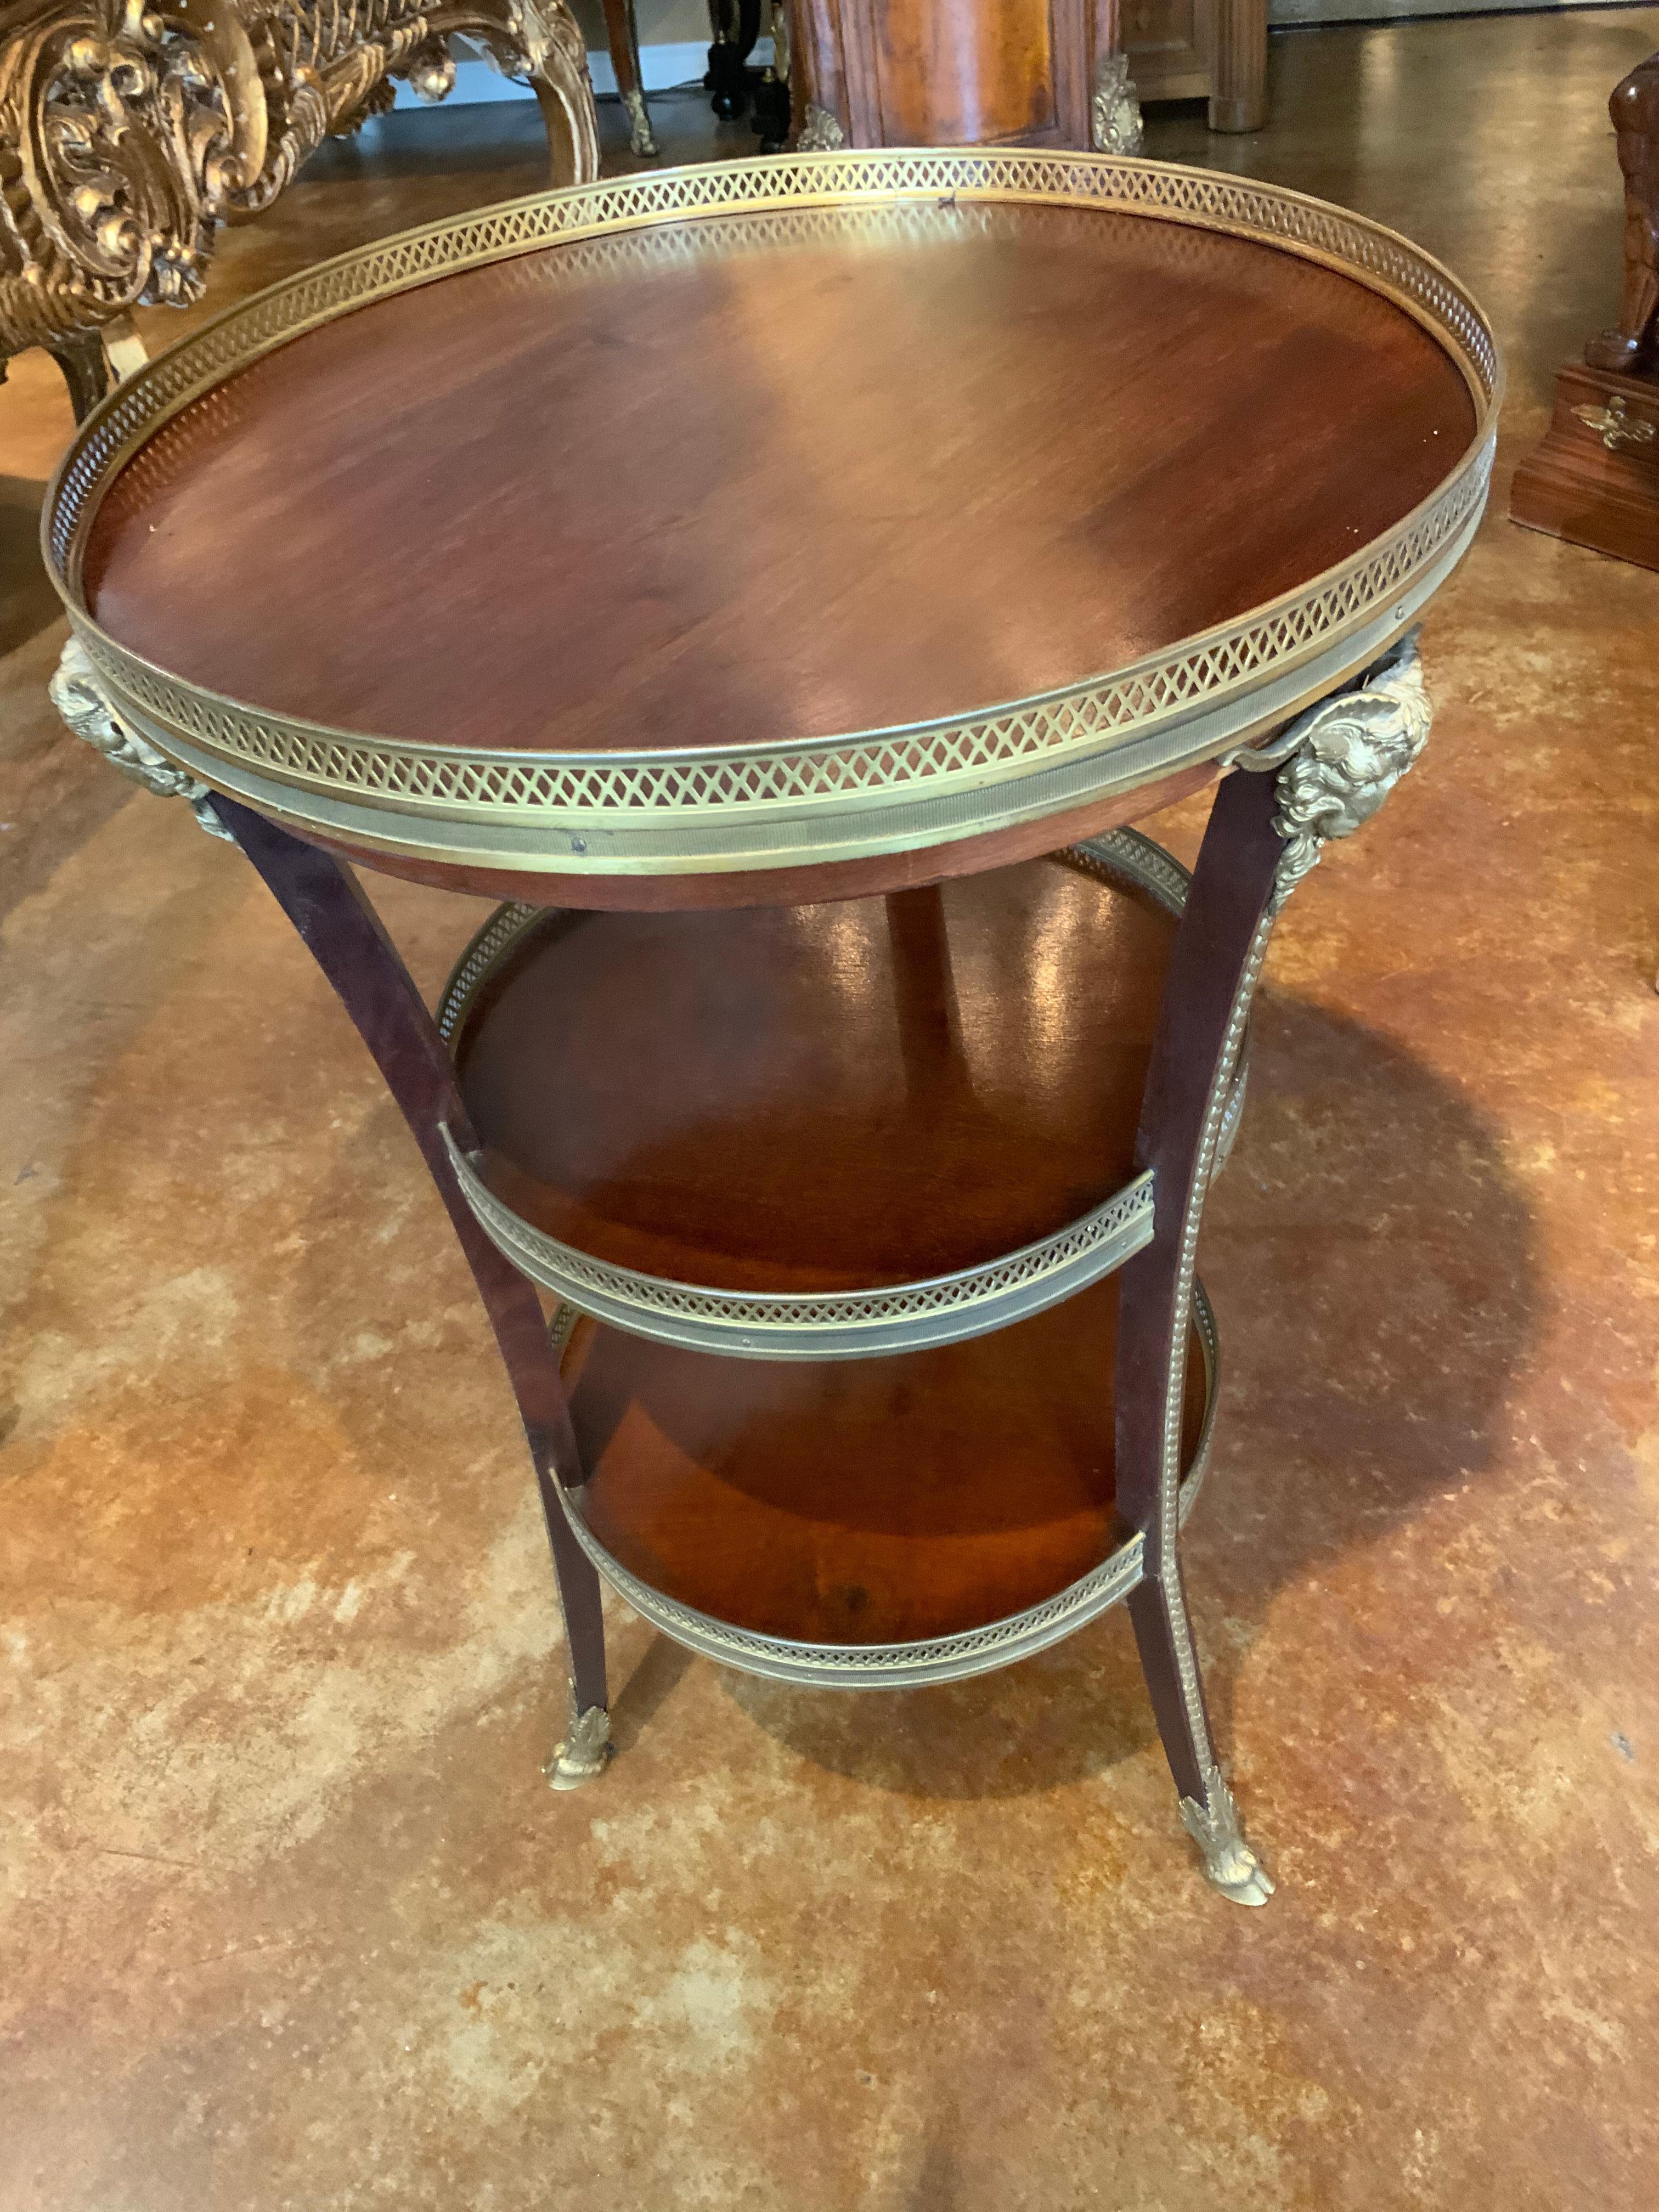 Excellent workmanship makes this piece special. The
Wood is mahogany in a rich hue. The piece has the
Top with a pierced gallery the surrounds the perimeter.
It has two additional shelves that also have bronze galleries
The legs slope gracefully